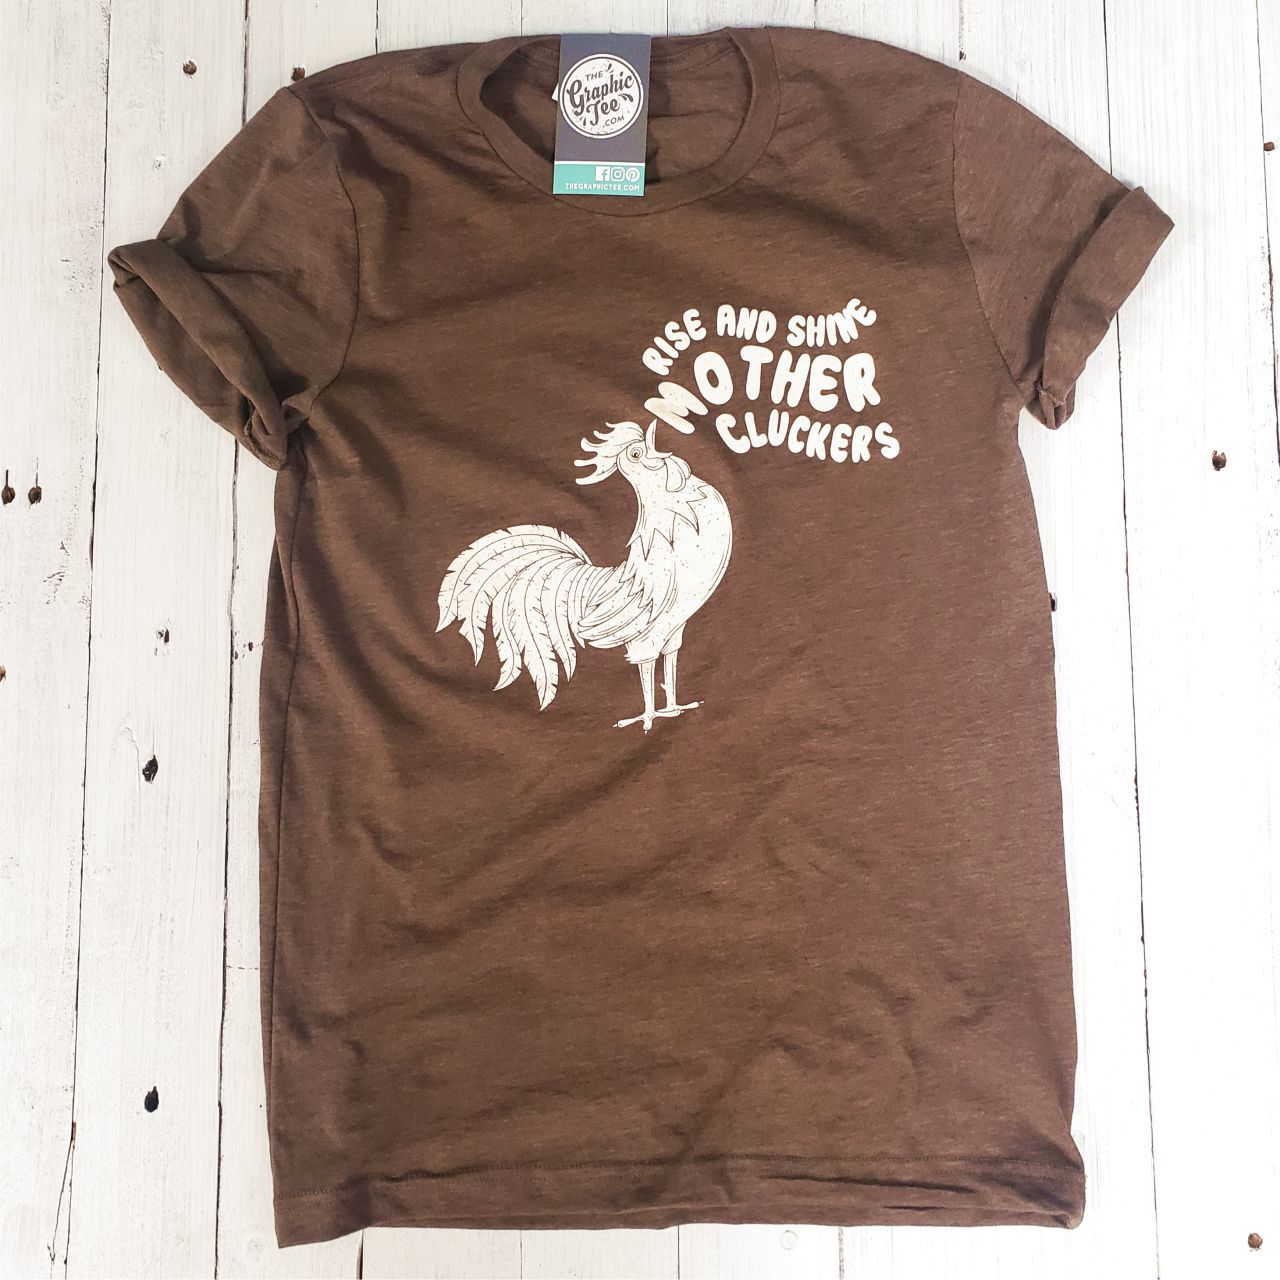 *WHOLESALE* Rise and Shine Mother Cluckers - Unisex Tee - The Graphic Tee